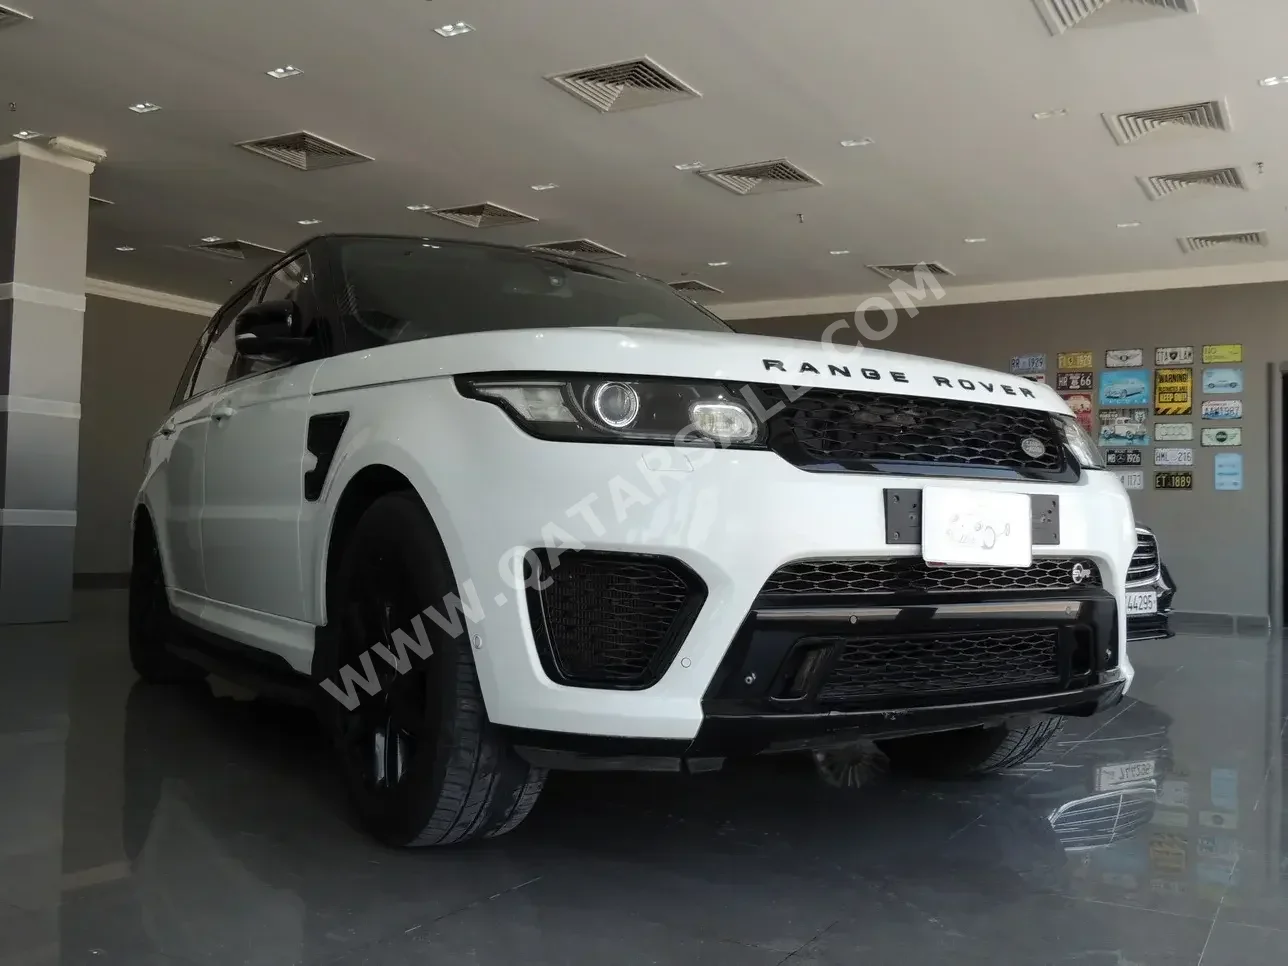 Land Rover  Range Rover  Sport SVR  2015  Automatic  187,000 Km  8 Cylinder  Four Wheel Drive (4WD)  SUV  White